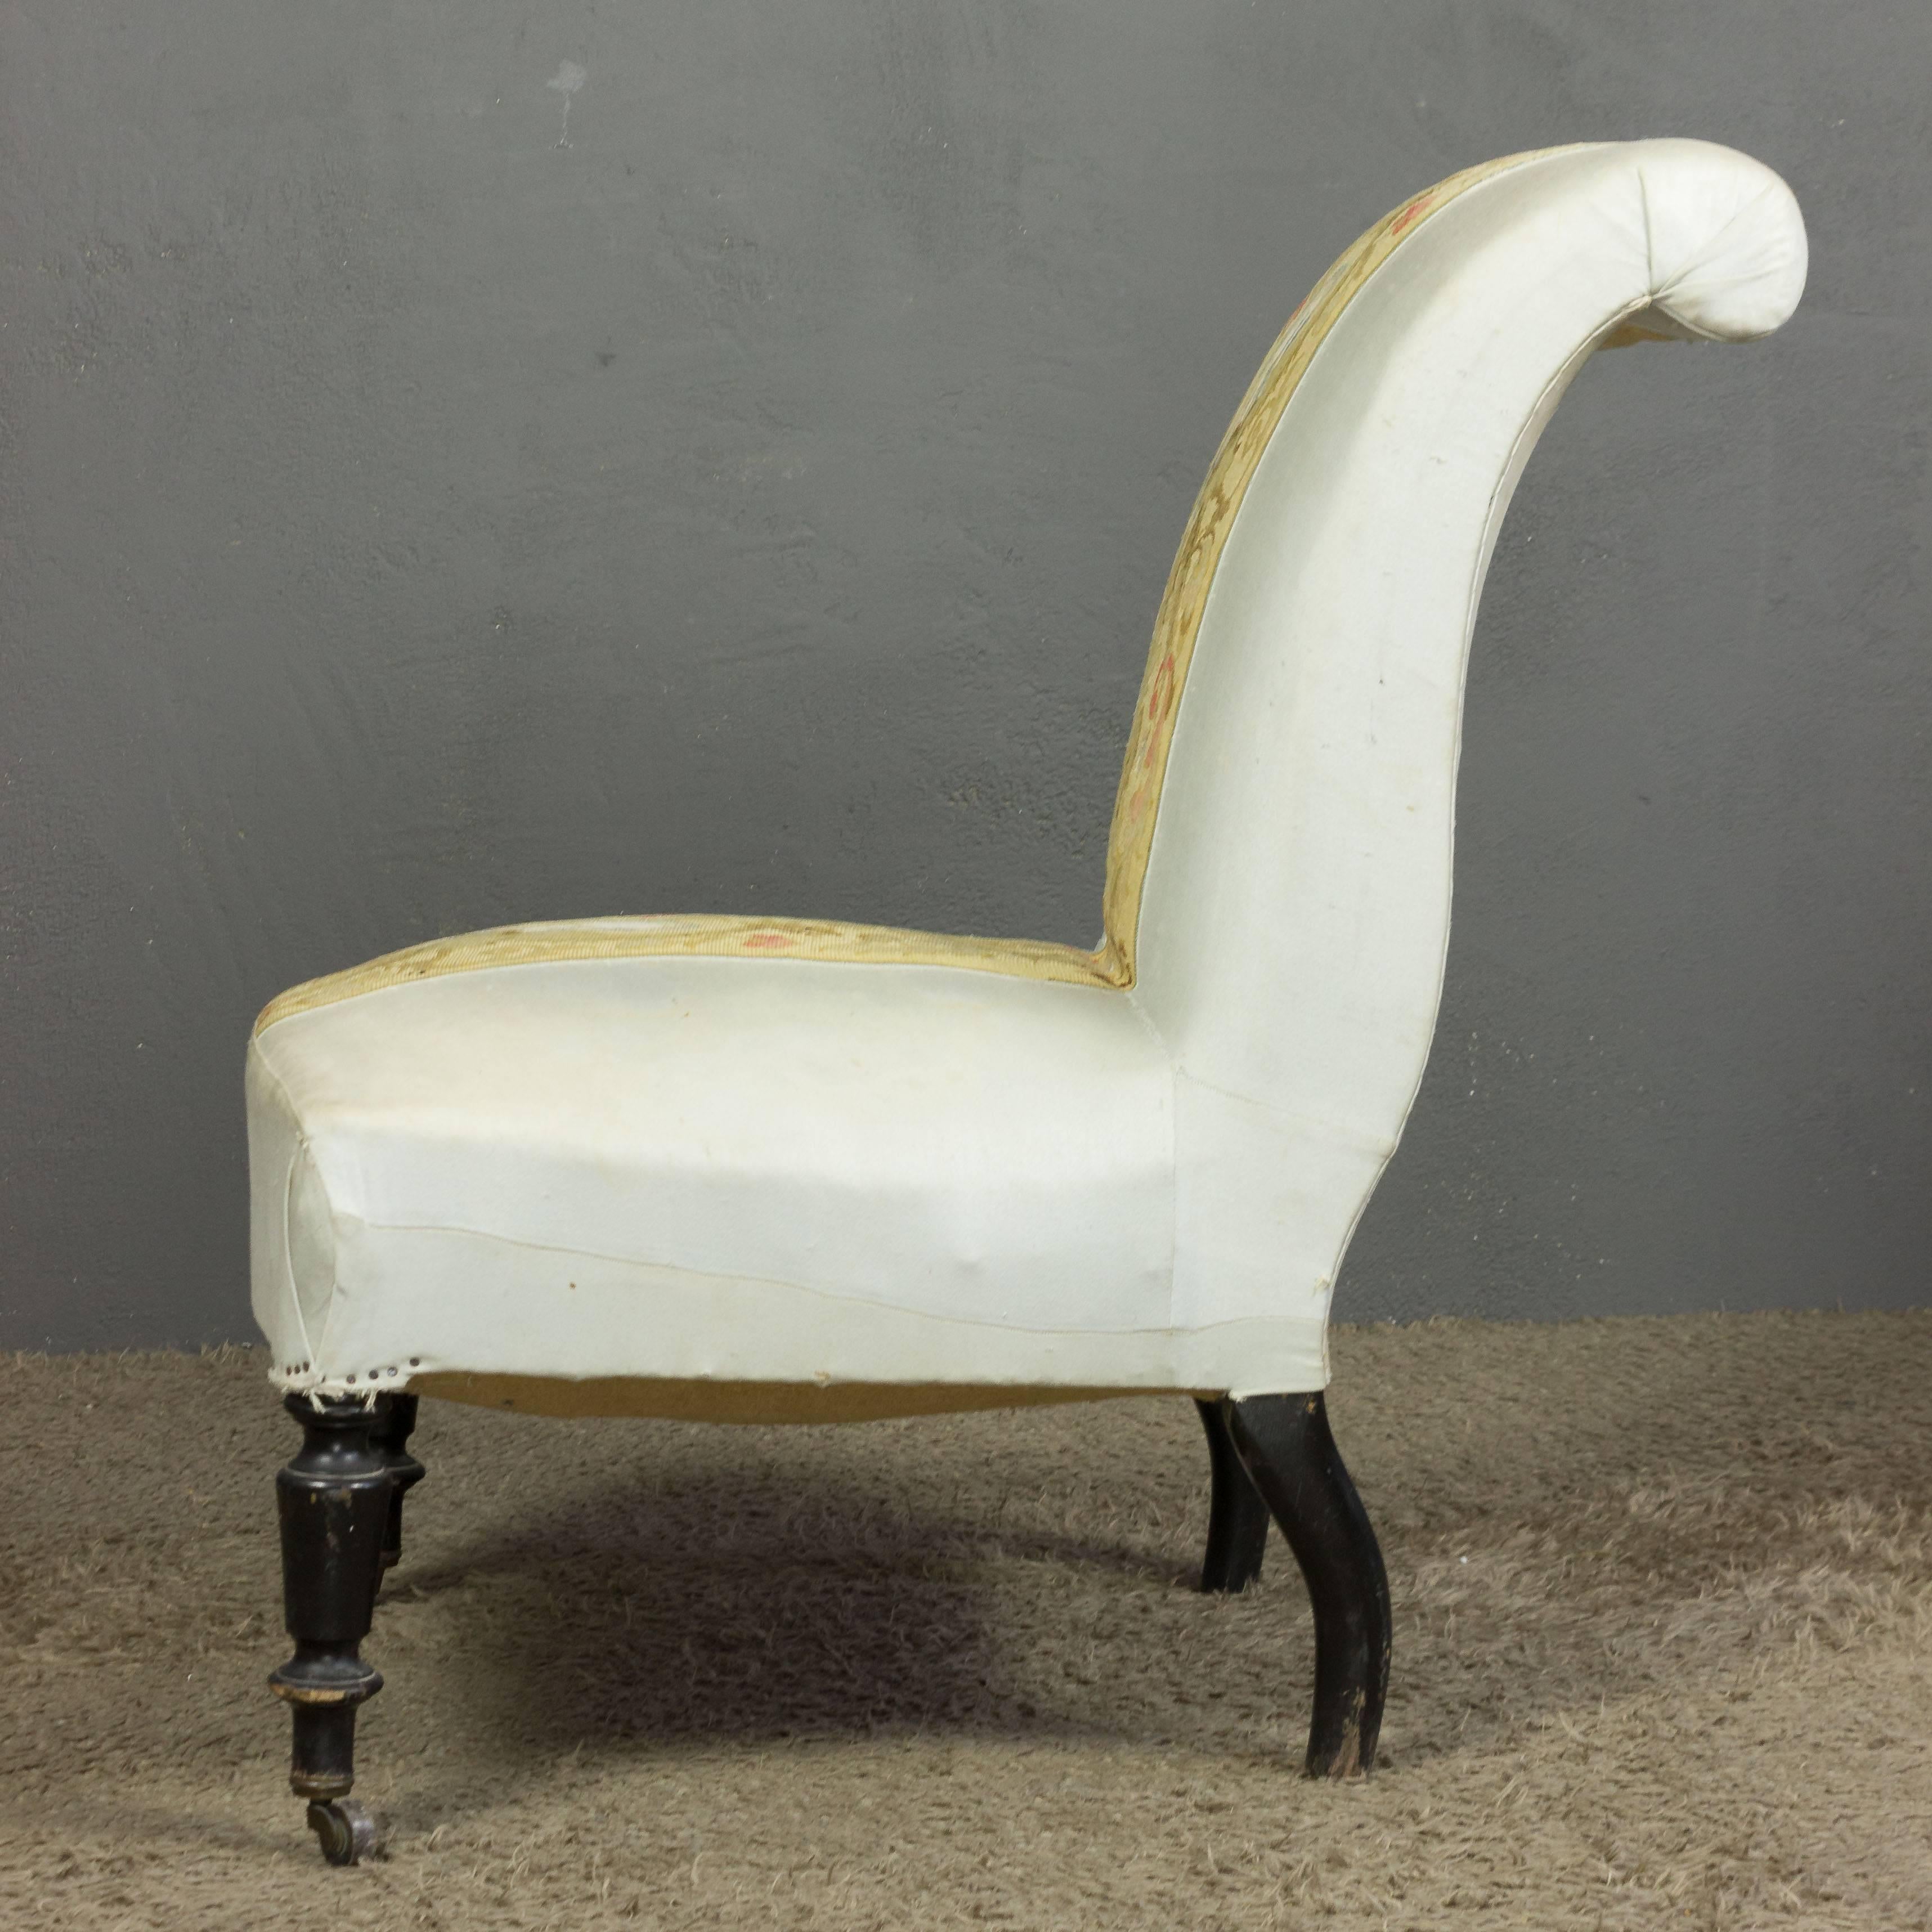 Mid-19th Century French Scrolled Back Slipper Chair with Embroidery For Sale